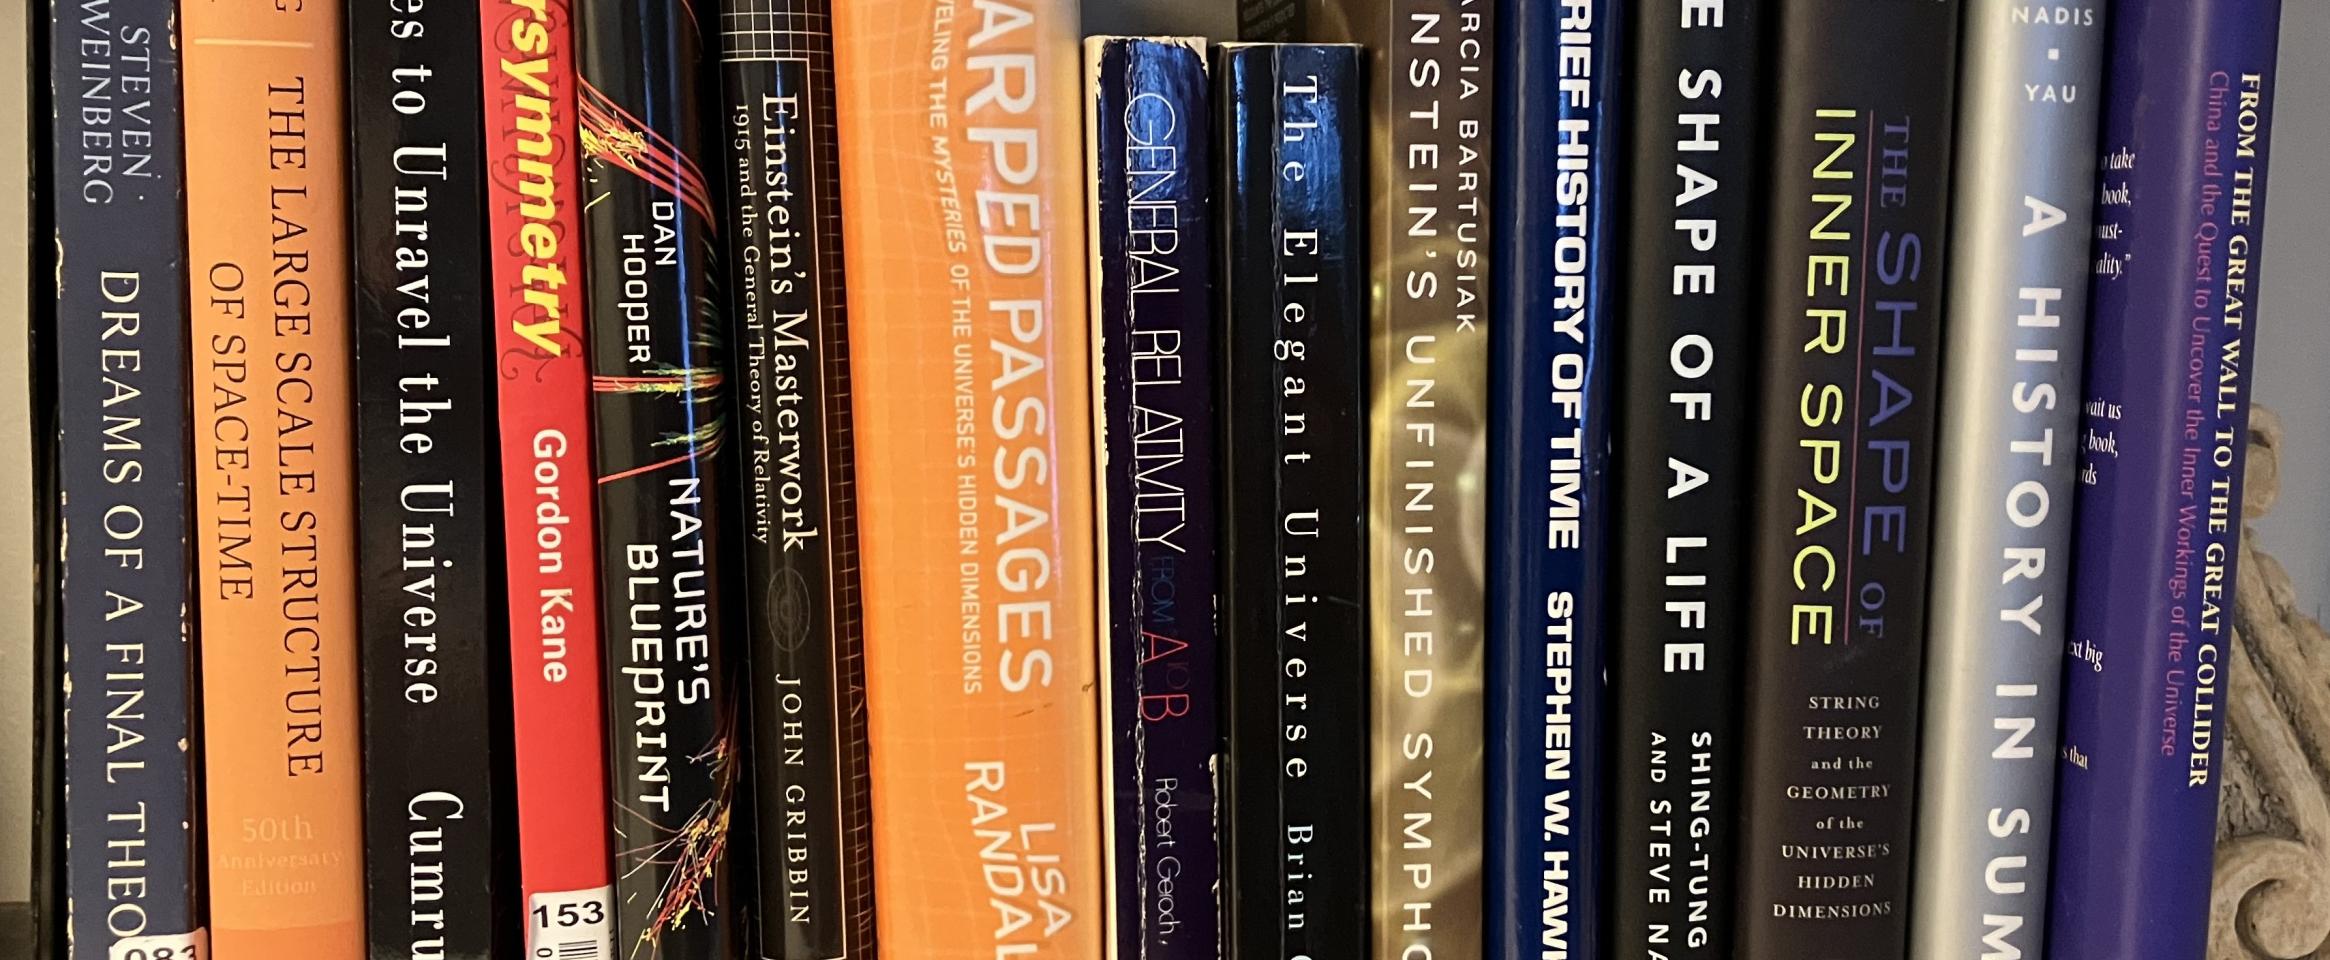 Rectangular photo of Steve Nadis’ office bookshelf showing several works on Einstein, general relativity, and space-time, along with Nadis’ and his coauthor’s previous books on these topics. Photo credit: Steve Nadis.